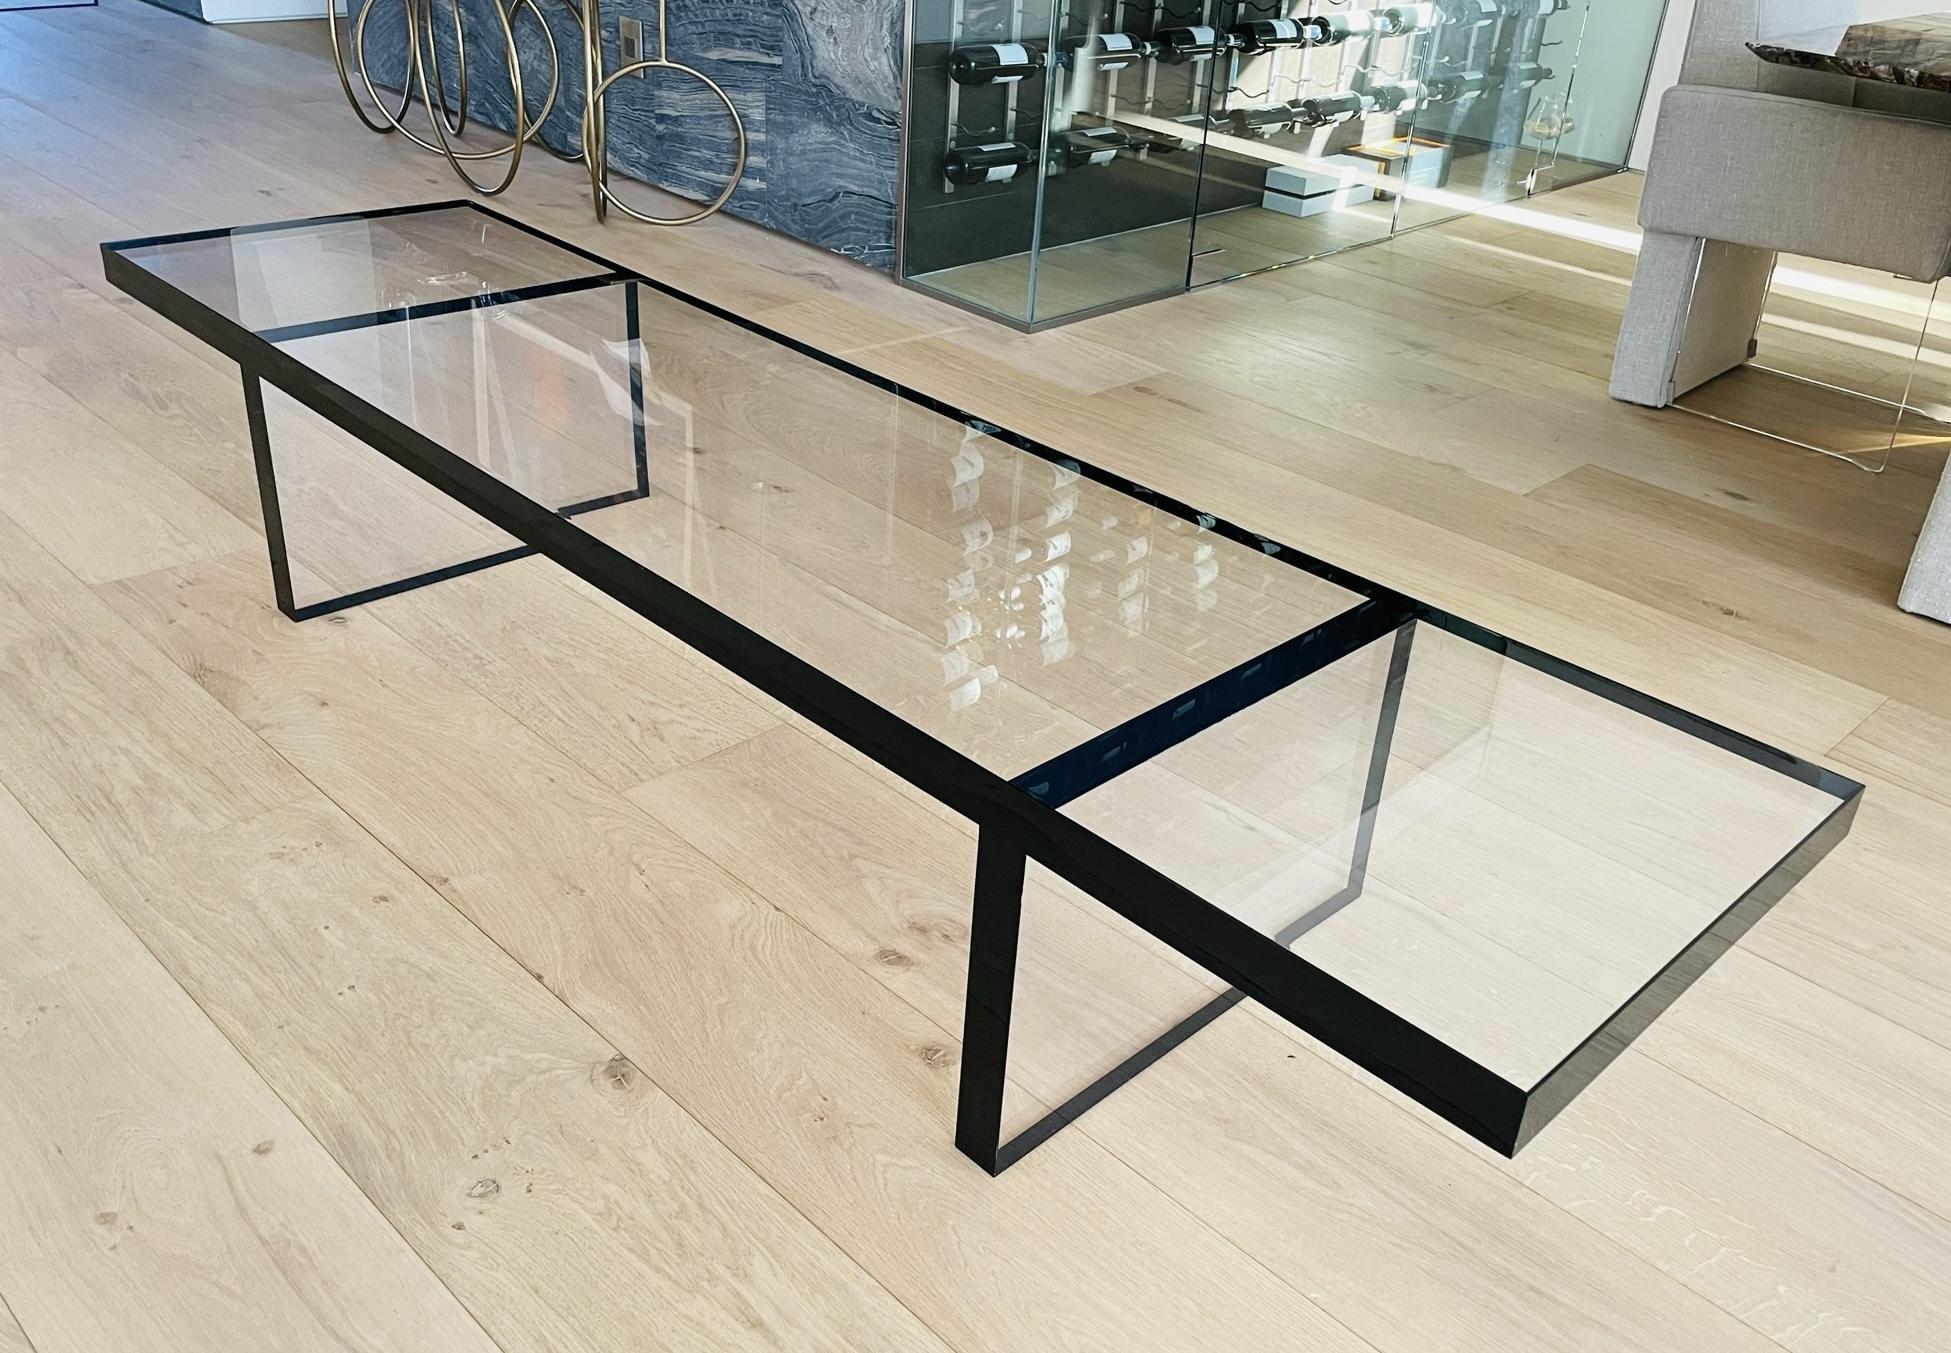 Introducing the Lucite Coffee Table / Bench in Clear & Black Lucite by Amparo Calderon Tapia! This stunning piece of furniture is a perfect blend of practicality and sophistication. Crafted from premium quality clear and black Lucite, this coffee